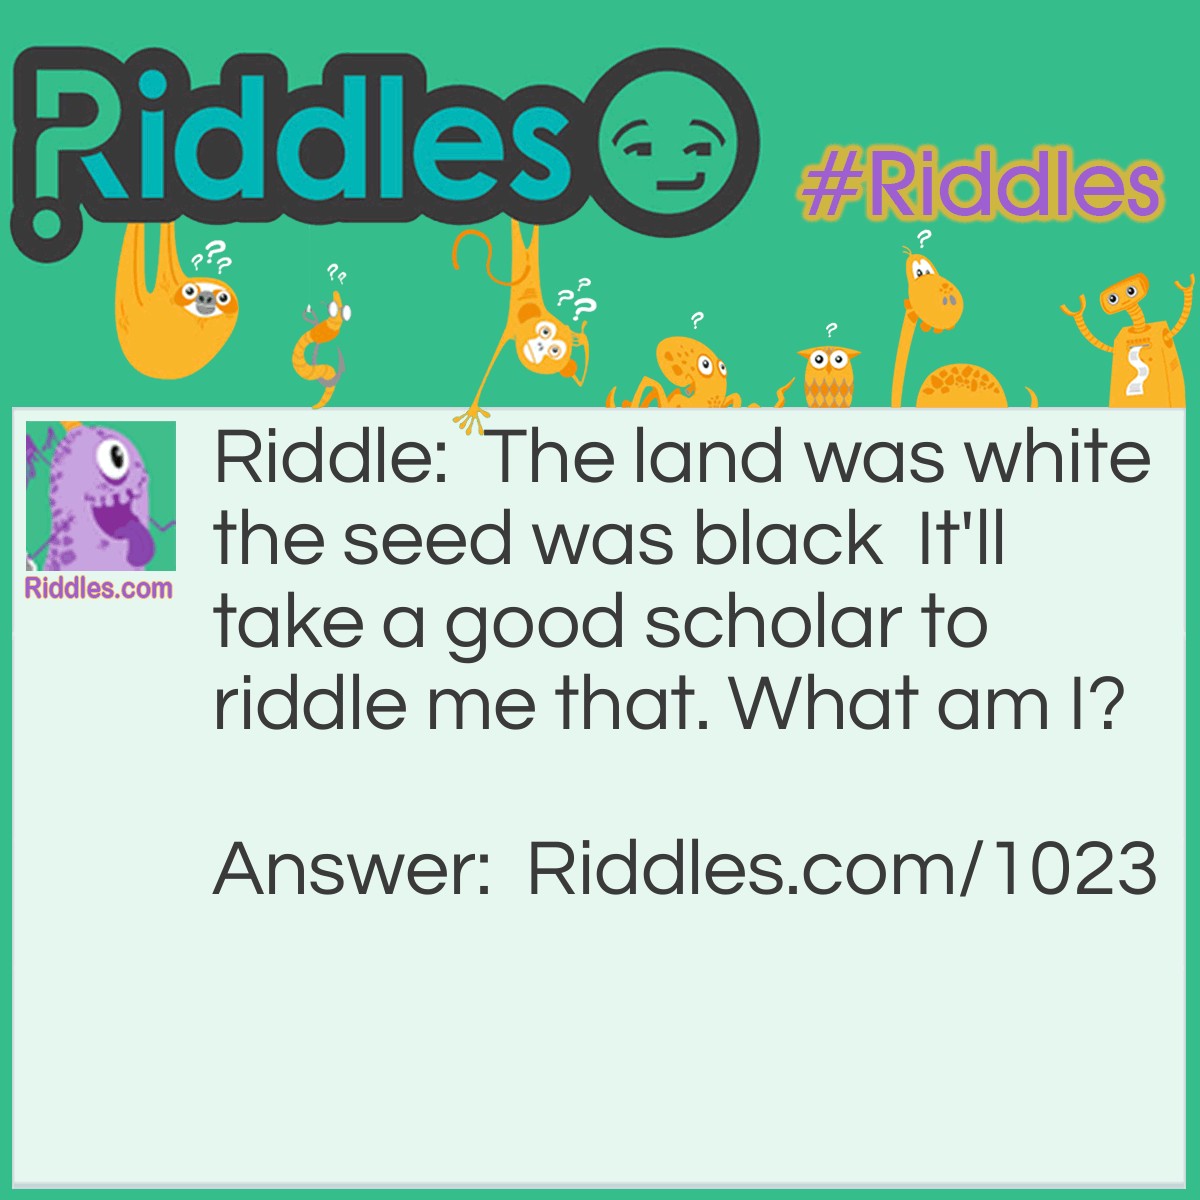 Riddle: The land was white the seed was black  It'll take a good scholar to riddle me that. What am I? Answer: An eye or an eyeball